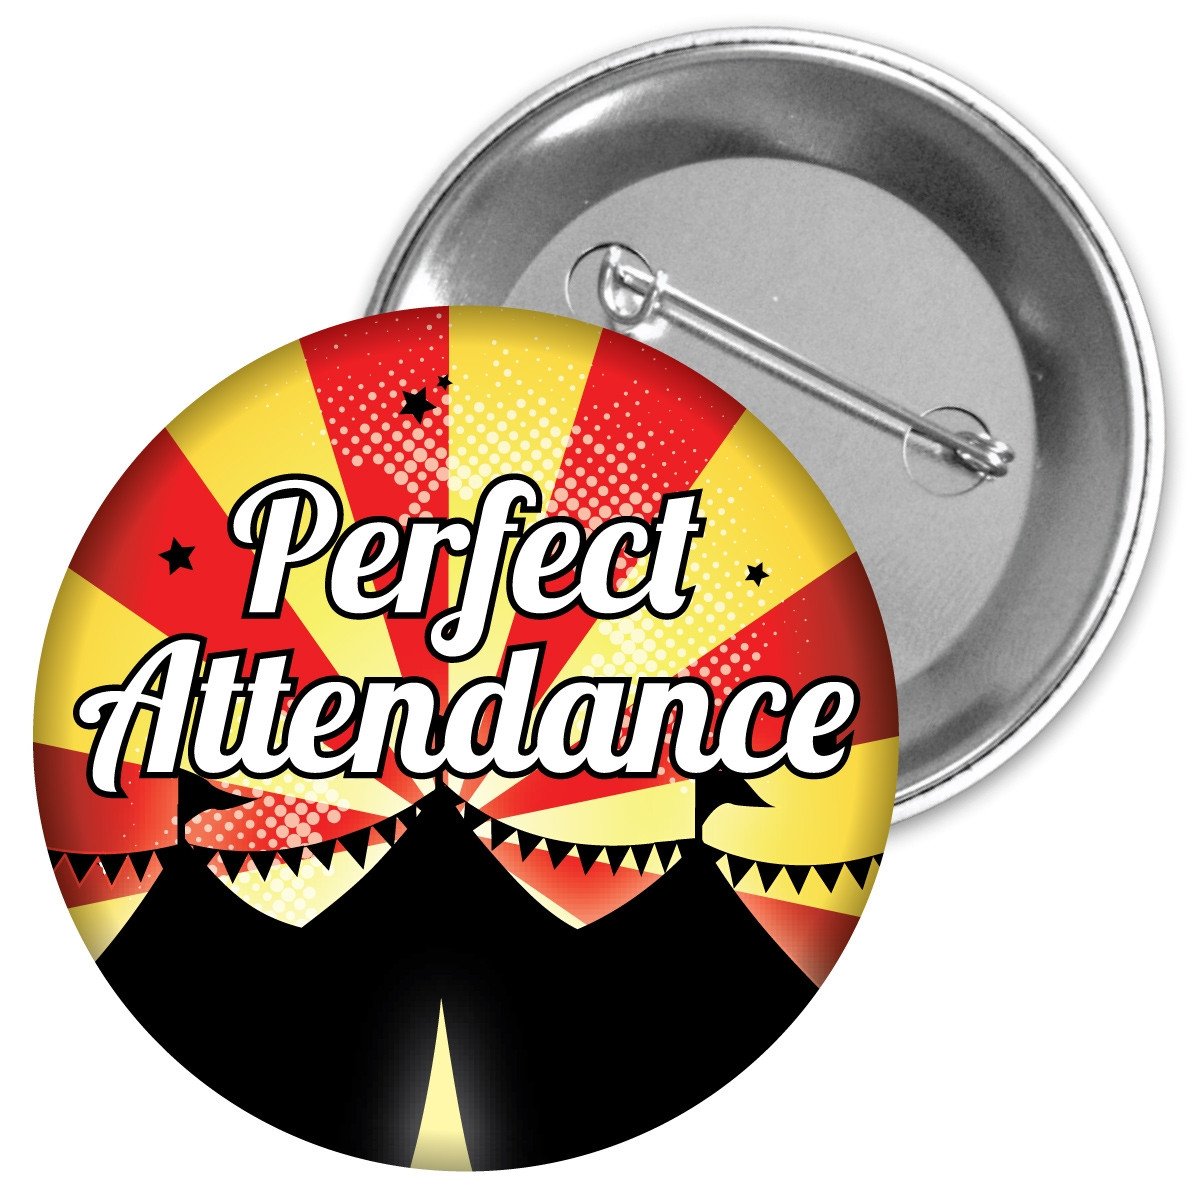 Metal Button - Perfect Attendance (Circus)